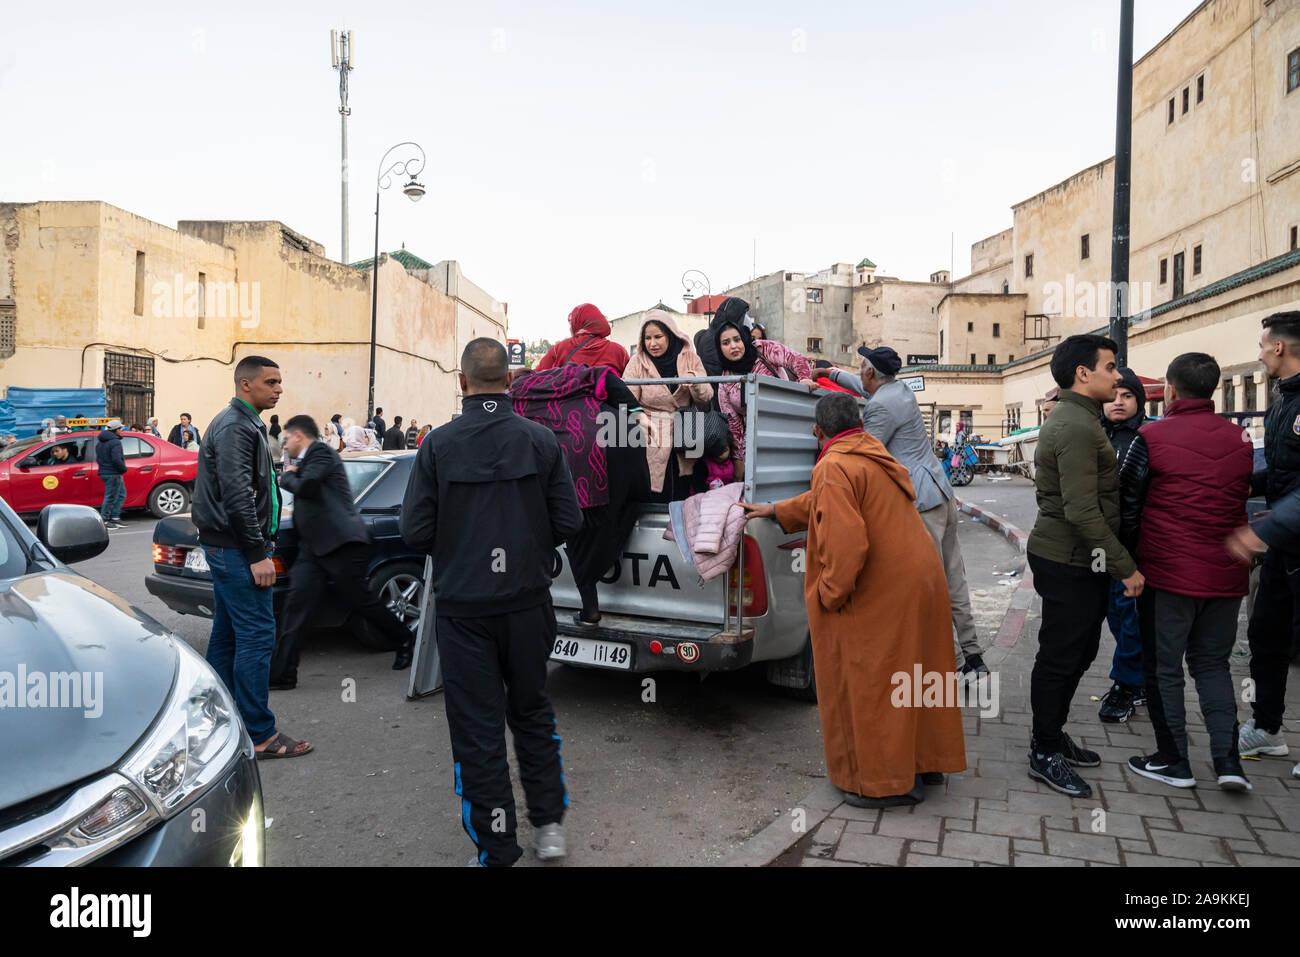 Fez, Morocco. November 9, 2019.   some people get on a small pickup truck Stock Photo